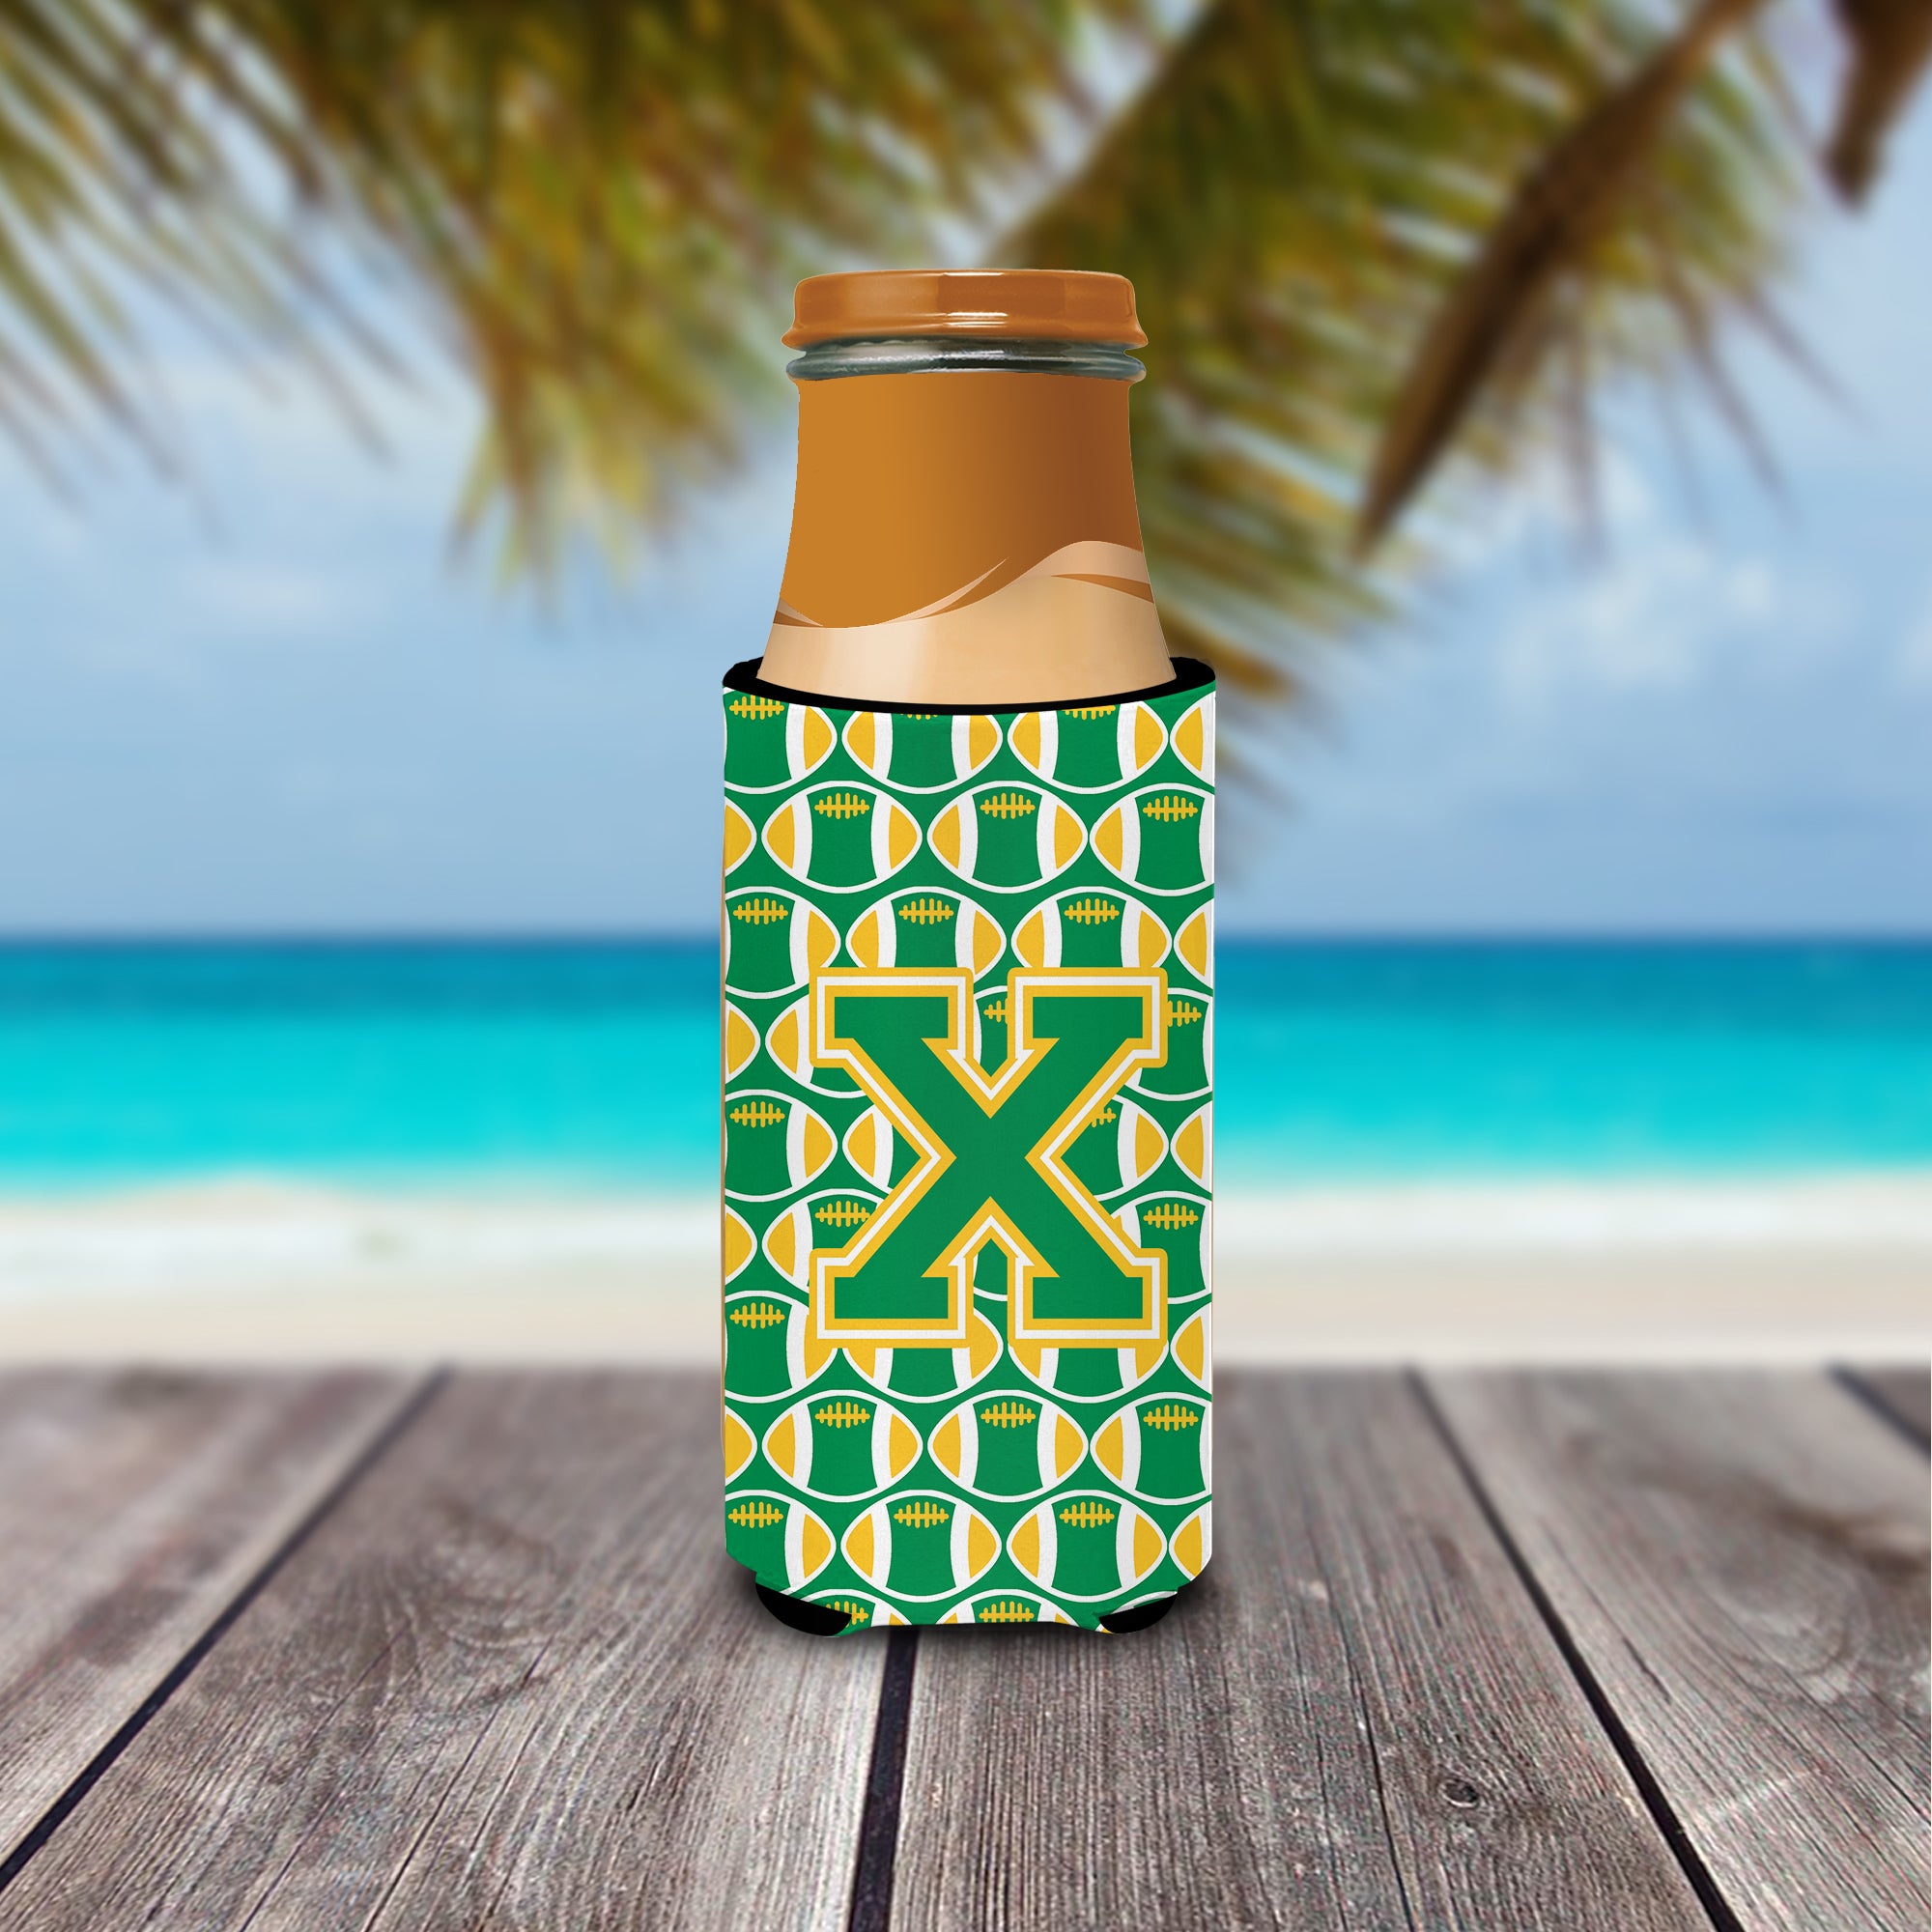 Letter X Football Green and Gold Ultra Beverage Insulators for slim cans CJ1069-XMUK.